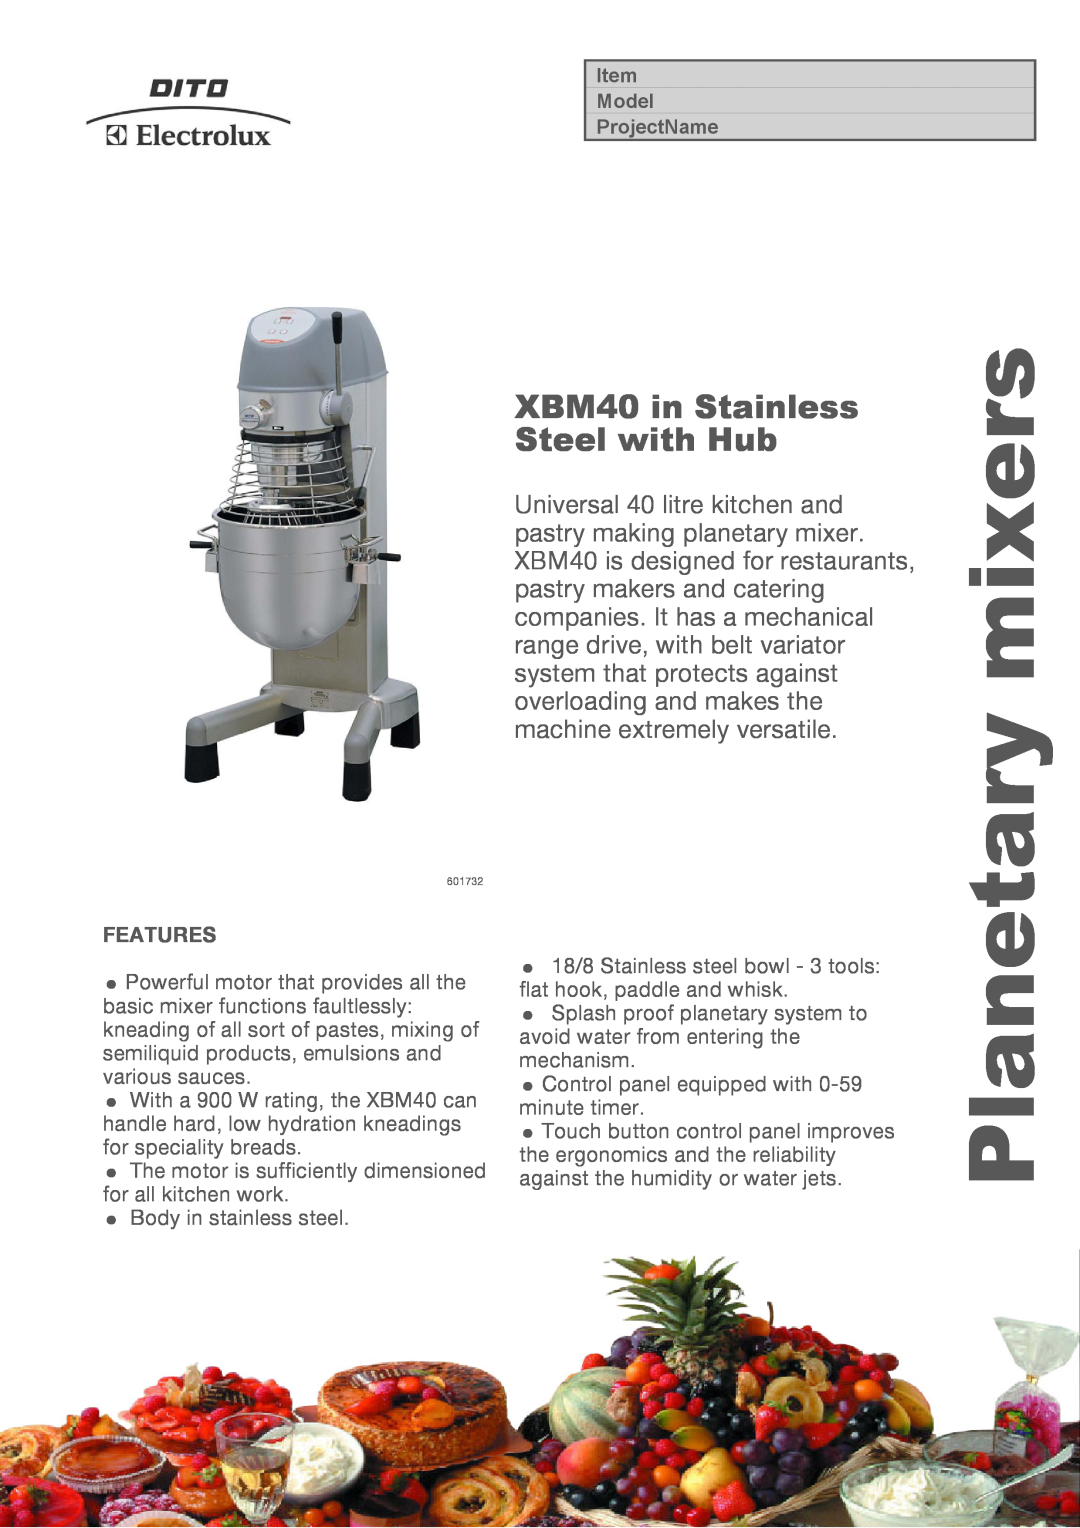 Electrolux 601732, XBMF40ASX3 manual mixers, Planetary, XBM40 in Stainless Steel with Hub, Features 